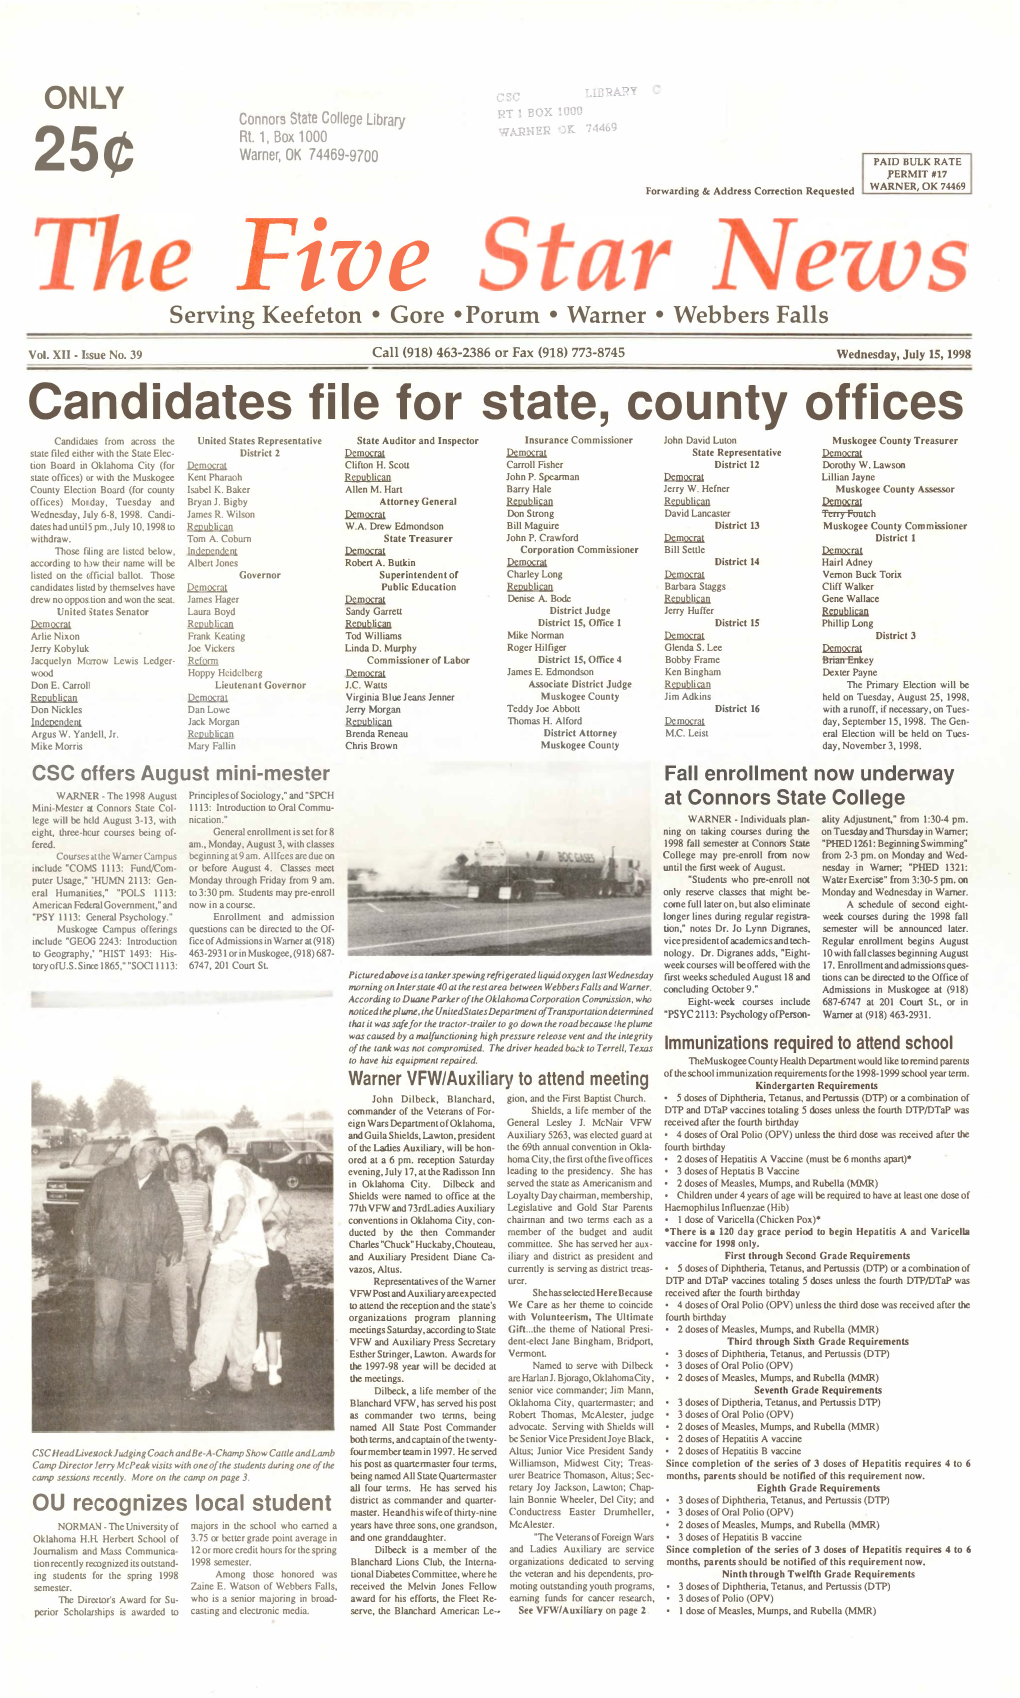 Candidates File for State, County Offices